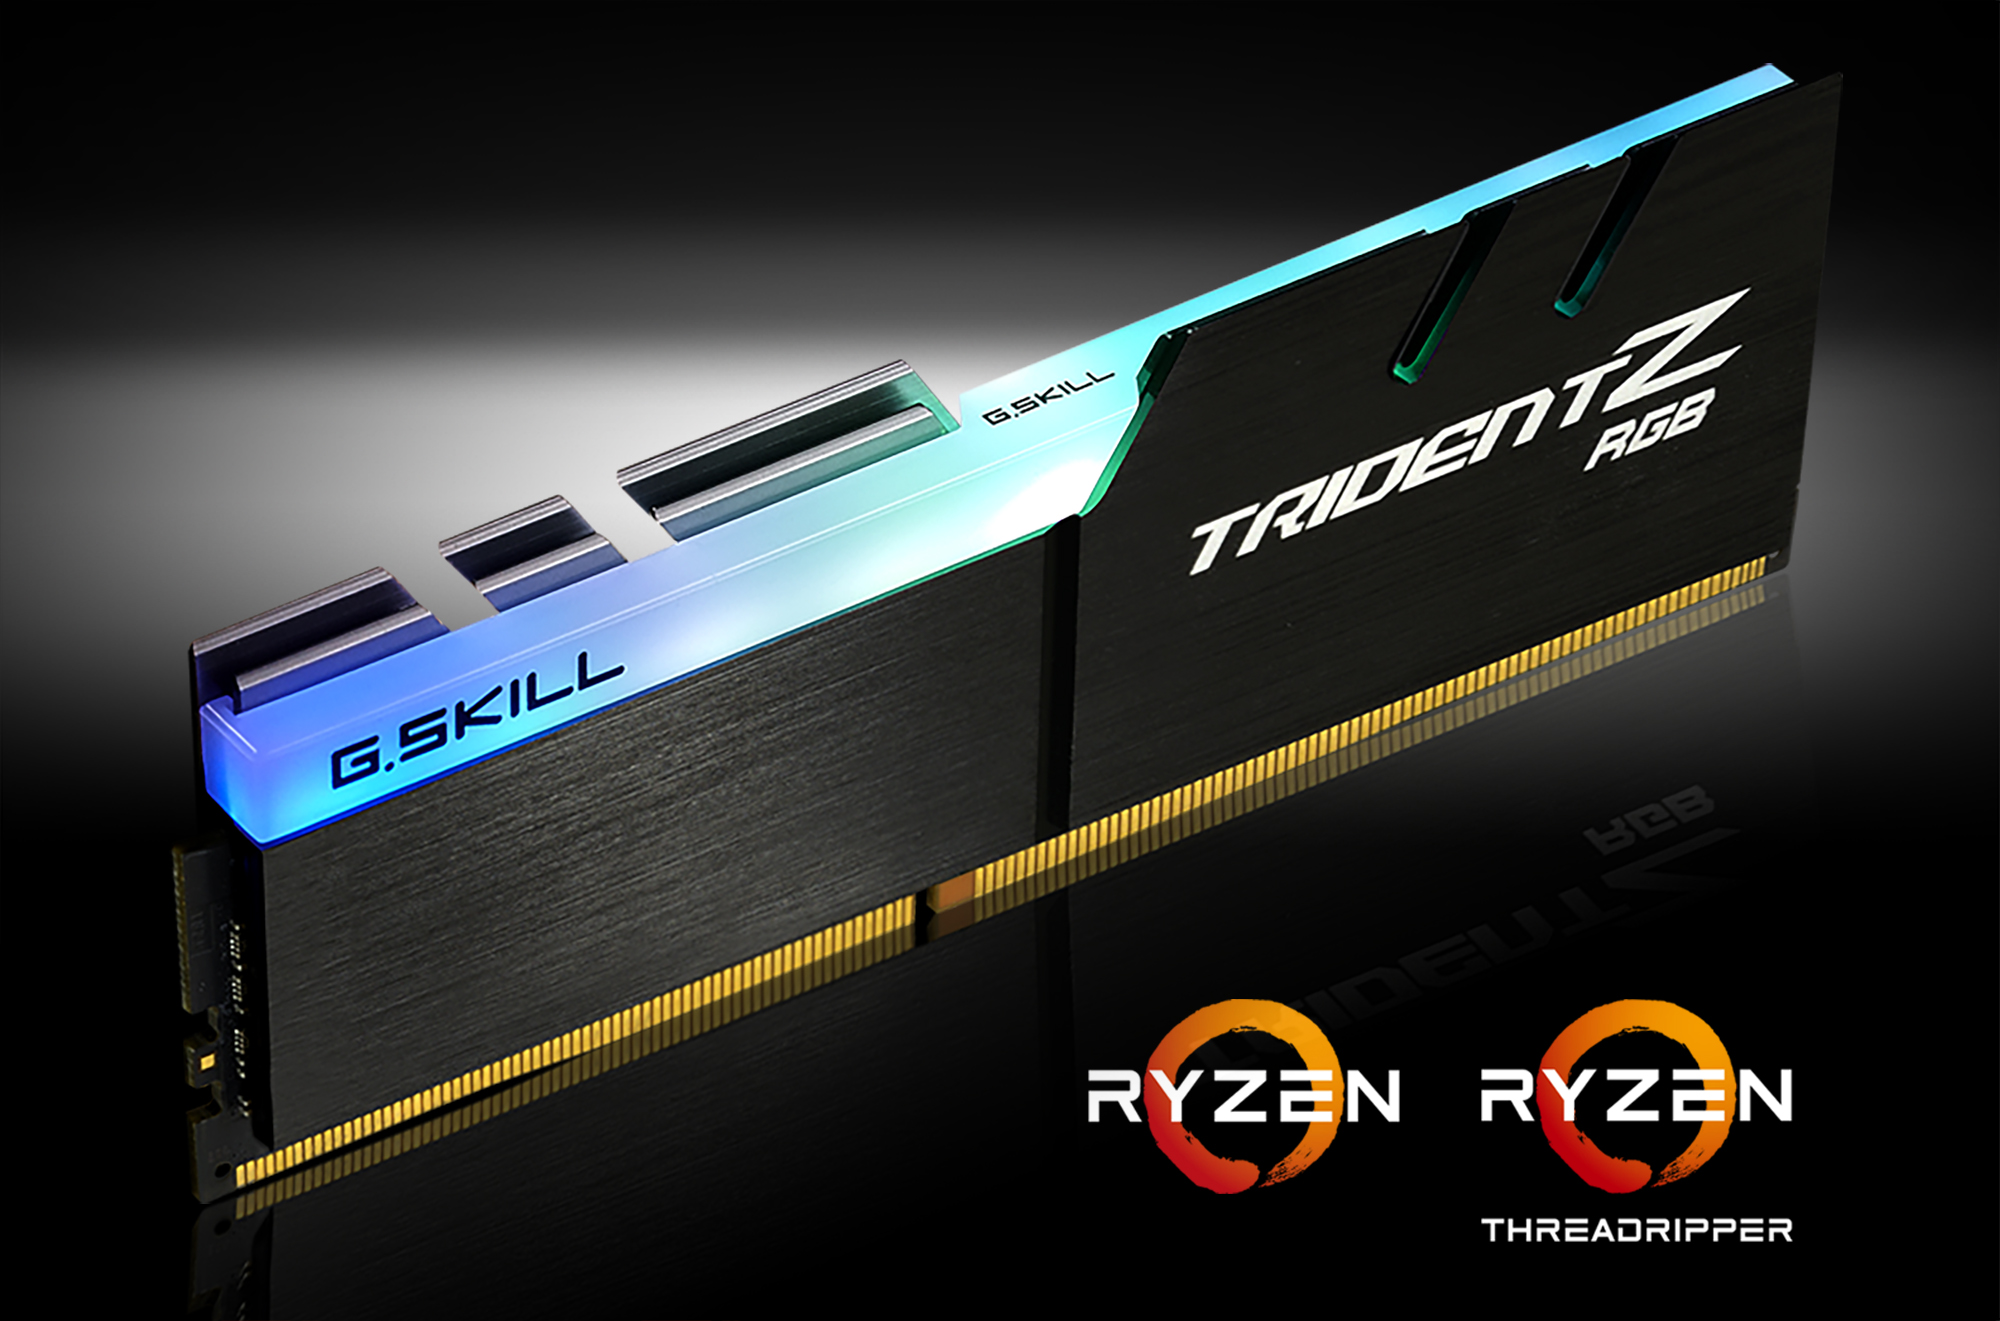 GSkill Announces New AMD Compatible Trident Z RGB Kits